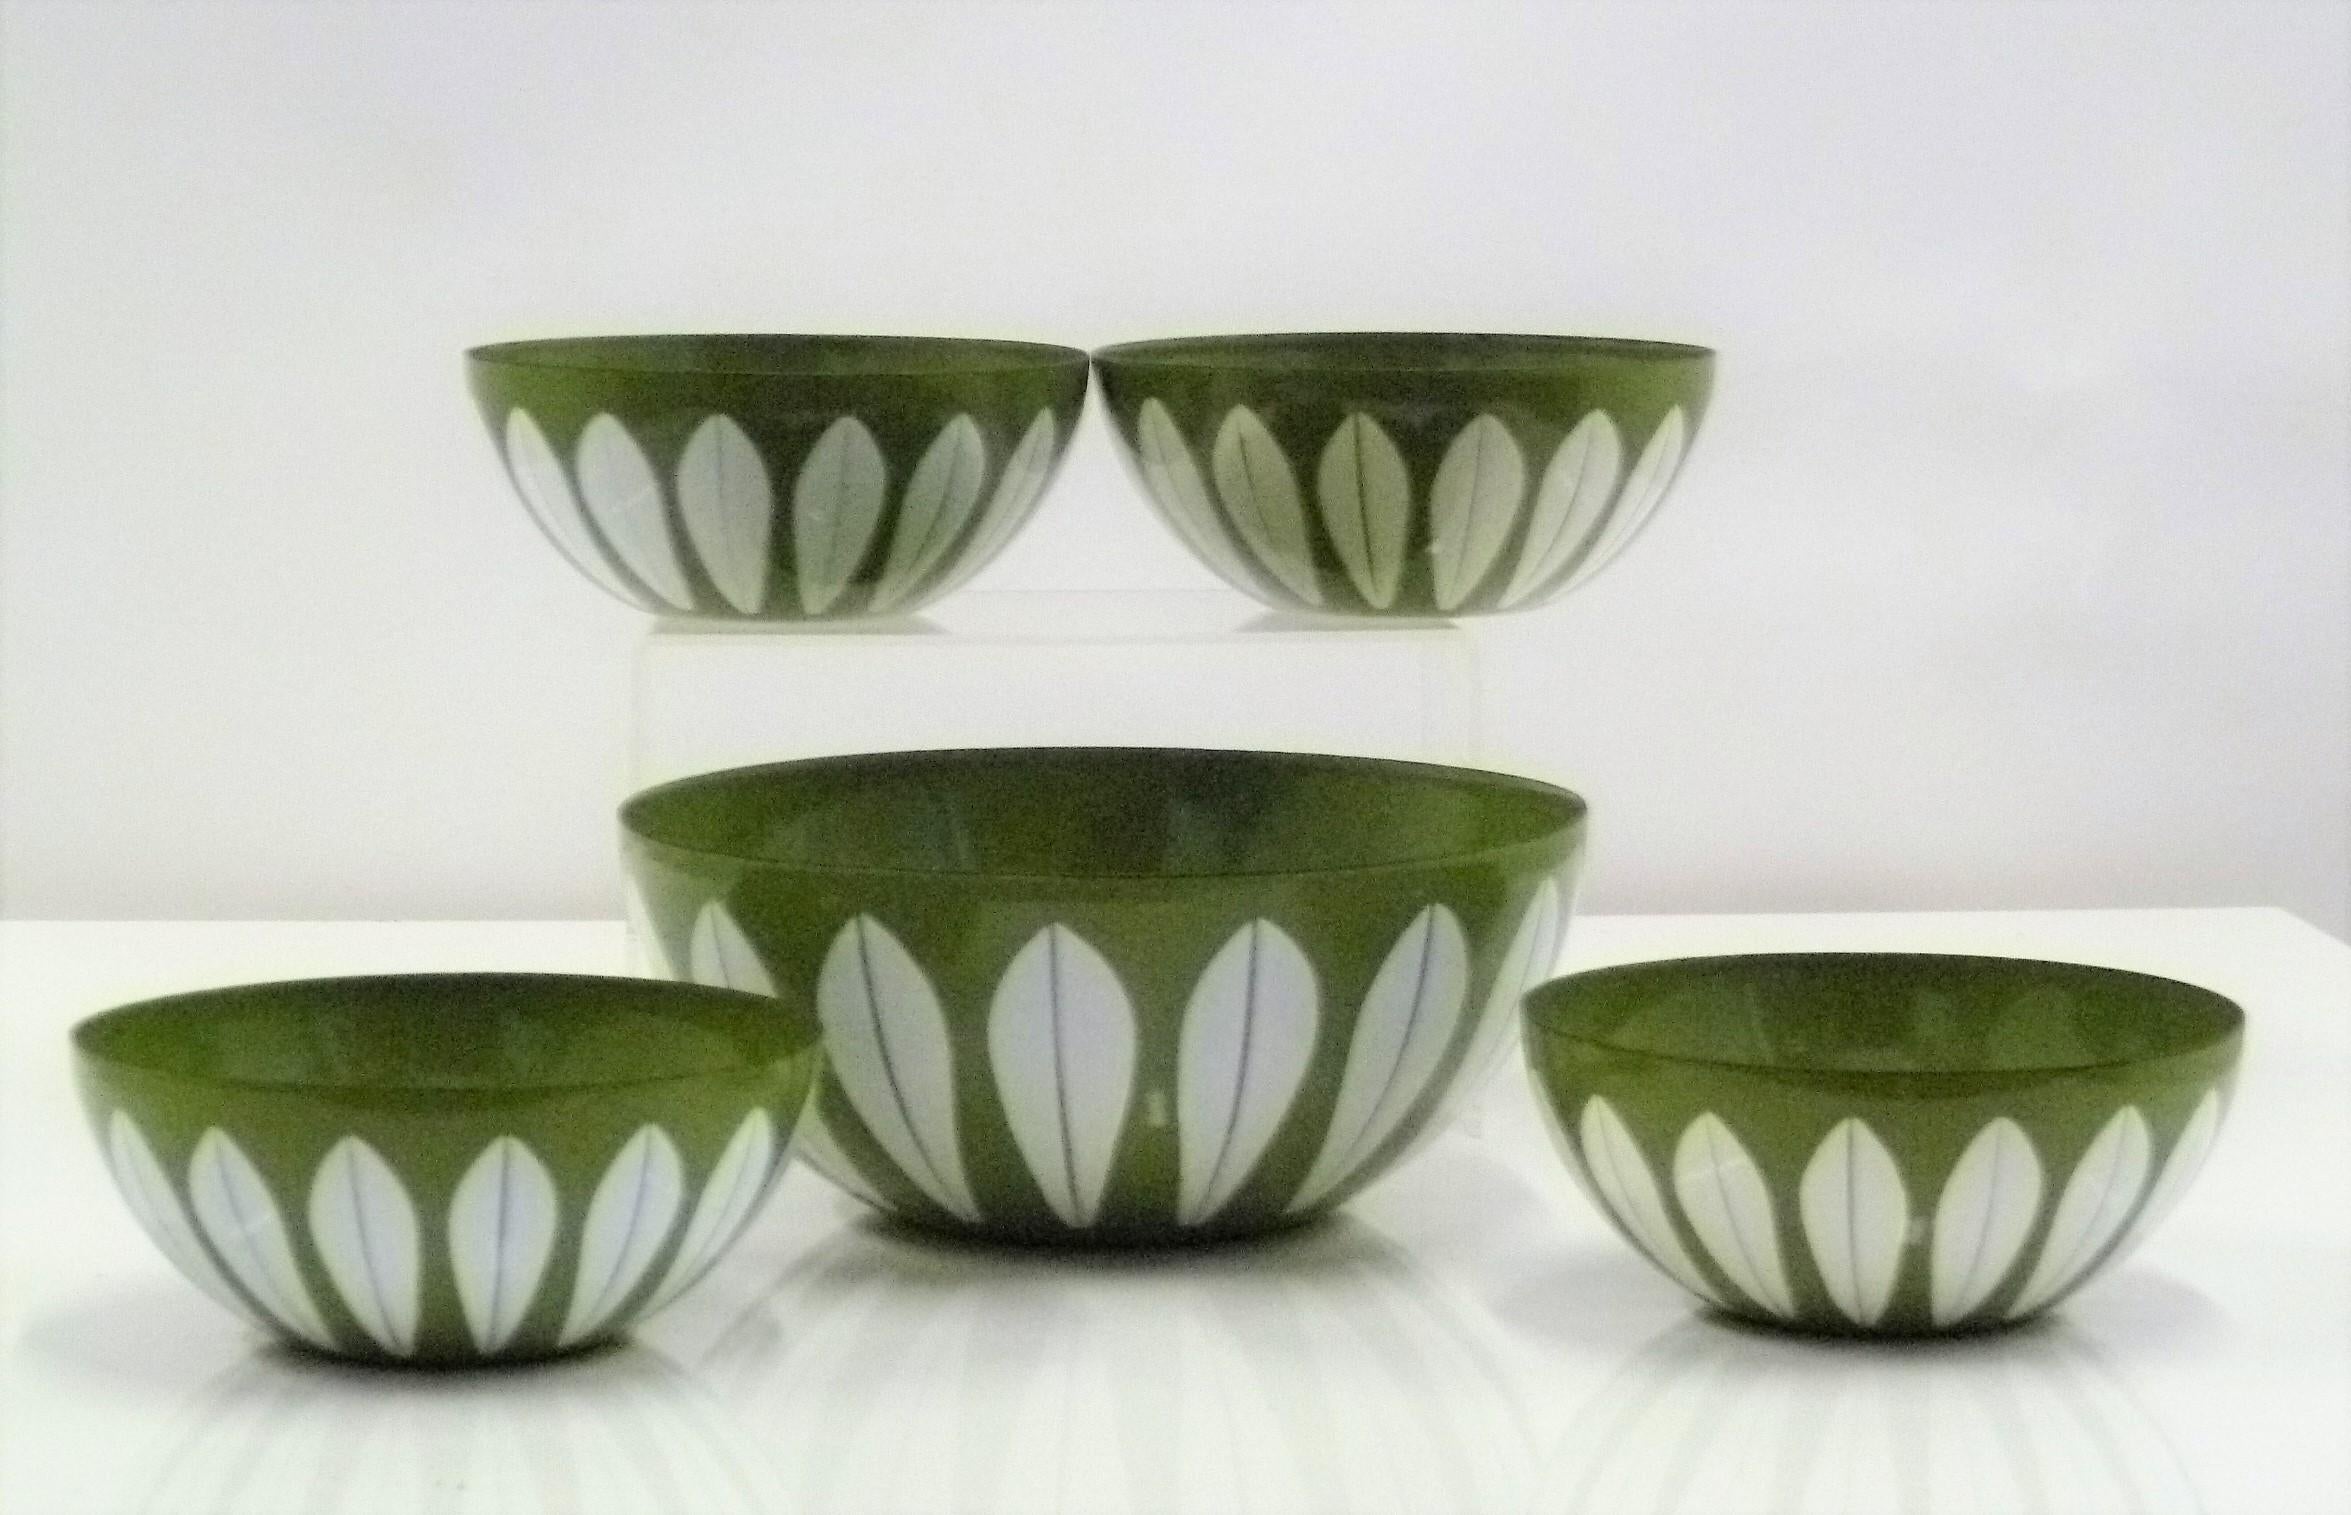 Midcentury Scandinavian Modern enameled Olive green lotus bowls designed by Grete Prytz Kittelsen. Set of five bowls consisting of one larger 8 in. diameter, and four smaller 5.5 in. diameter bowls made by CathrineHolm of Norway. In very good